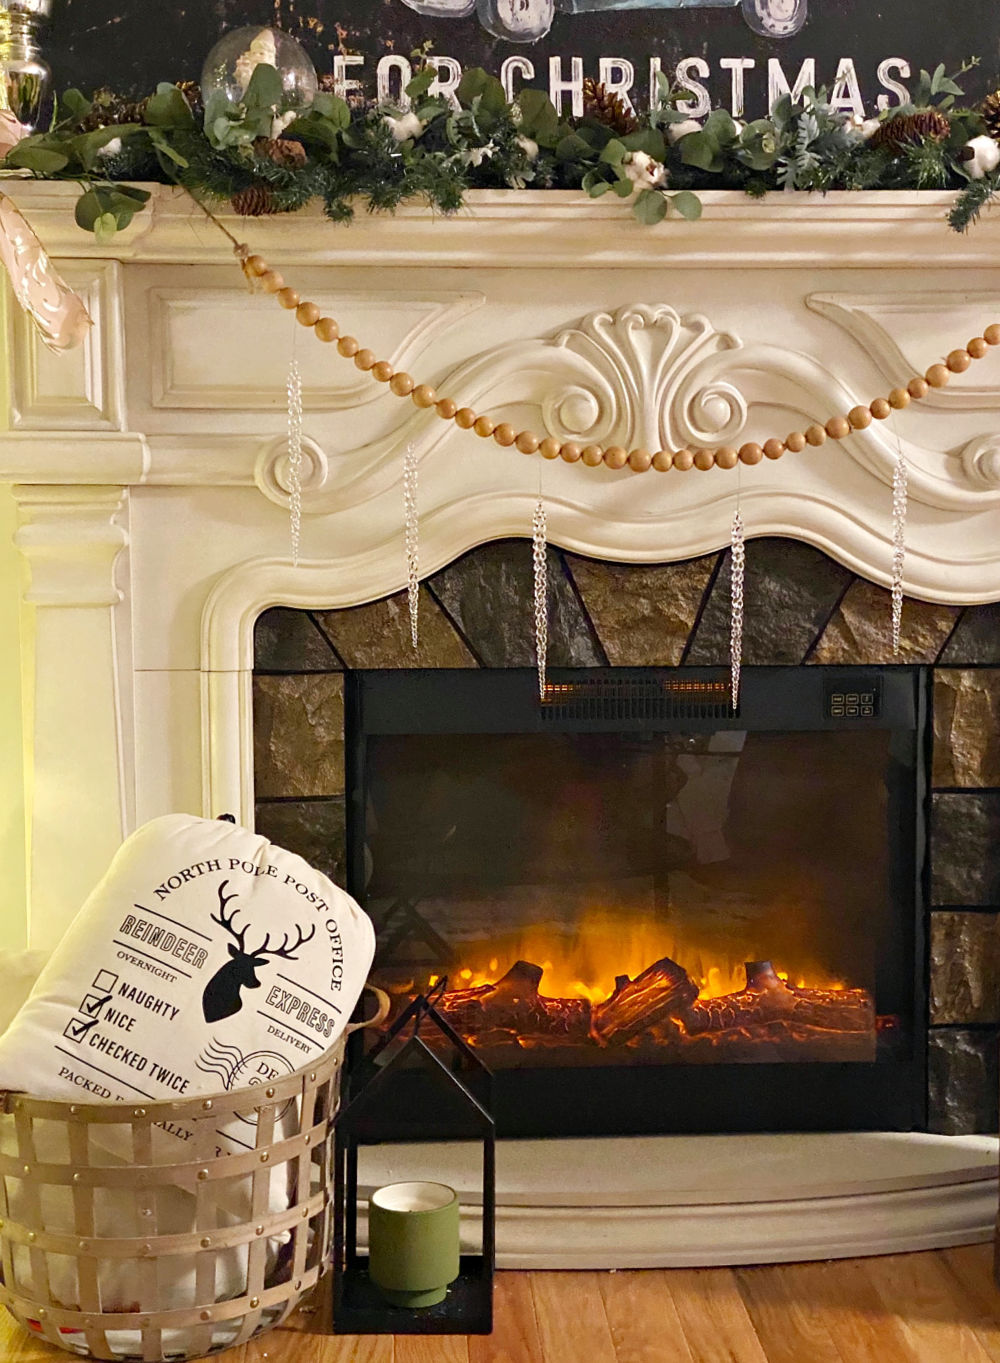 Christmas pillows by mantel hearth